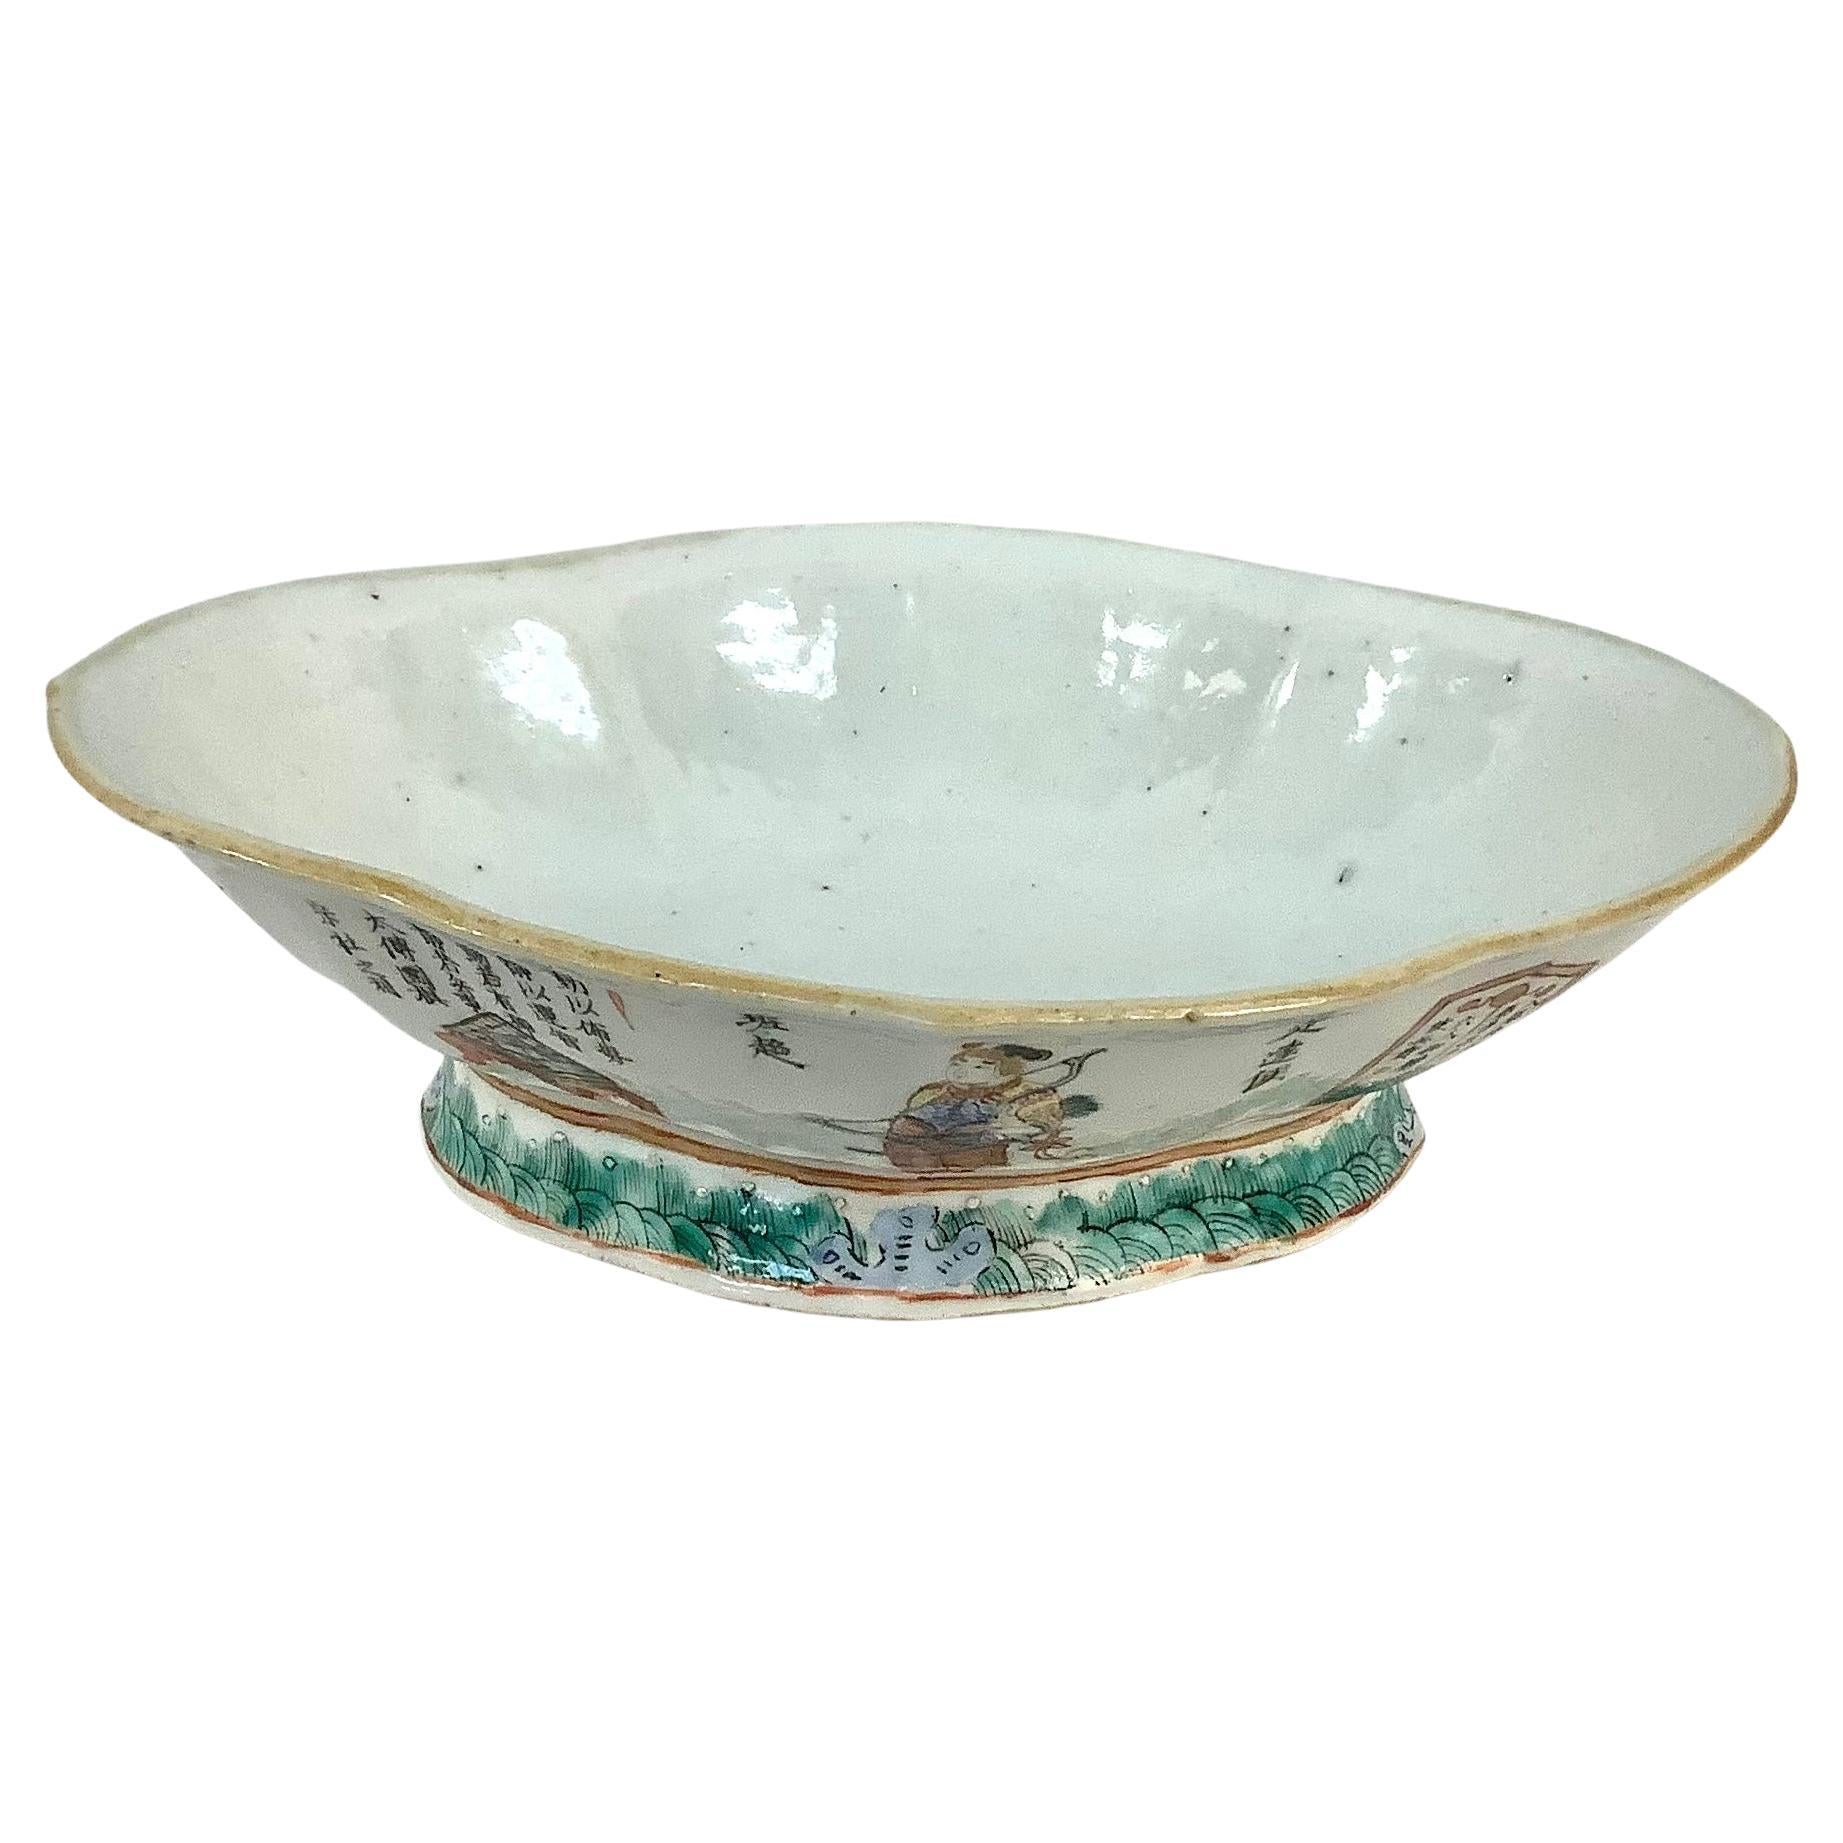 Vintage Wu Shang Pu porcelain oval bowl. Character scenes in green, red, rust and blue on white background. 

DIMENSIONS:
8.5”W x 6.5'D x 2.5